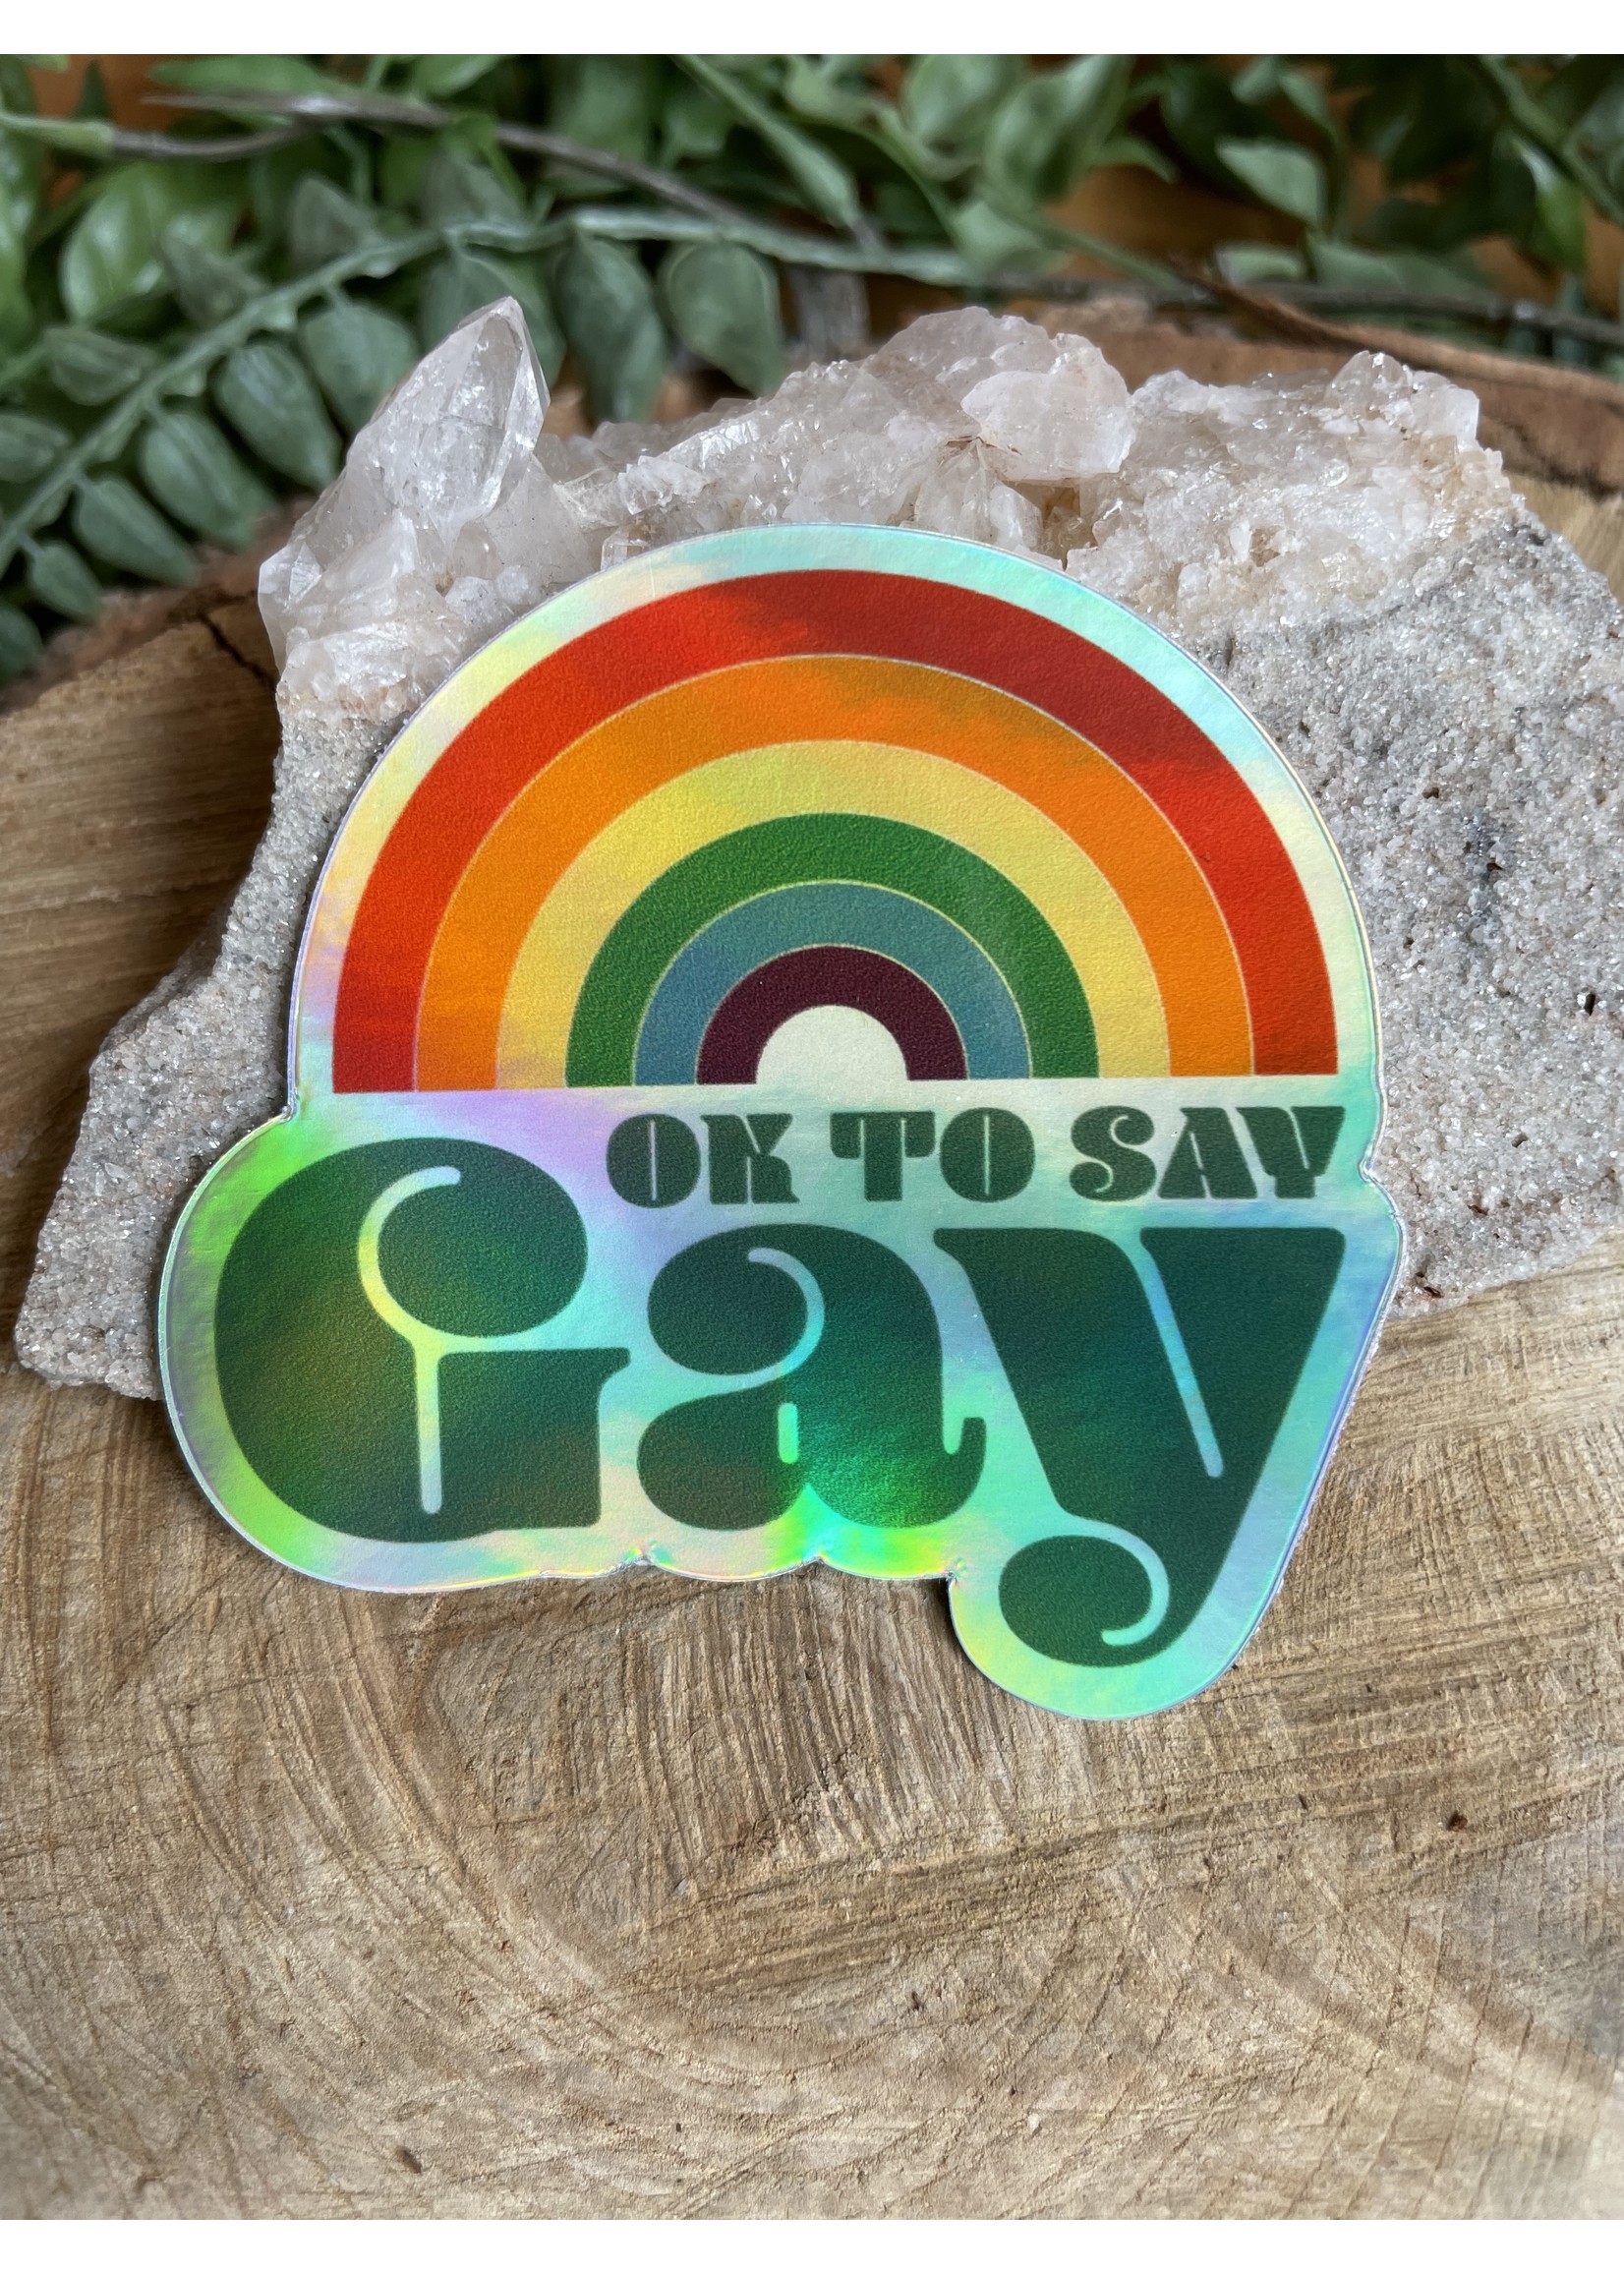 Tangled Up In Hue Sticker - Okay To Say Gay Holographic